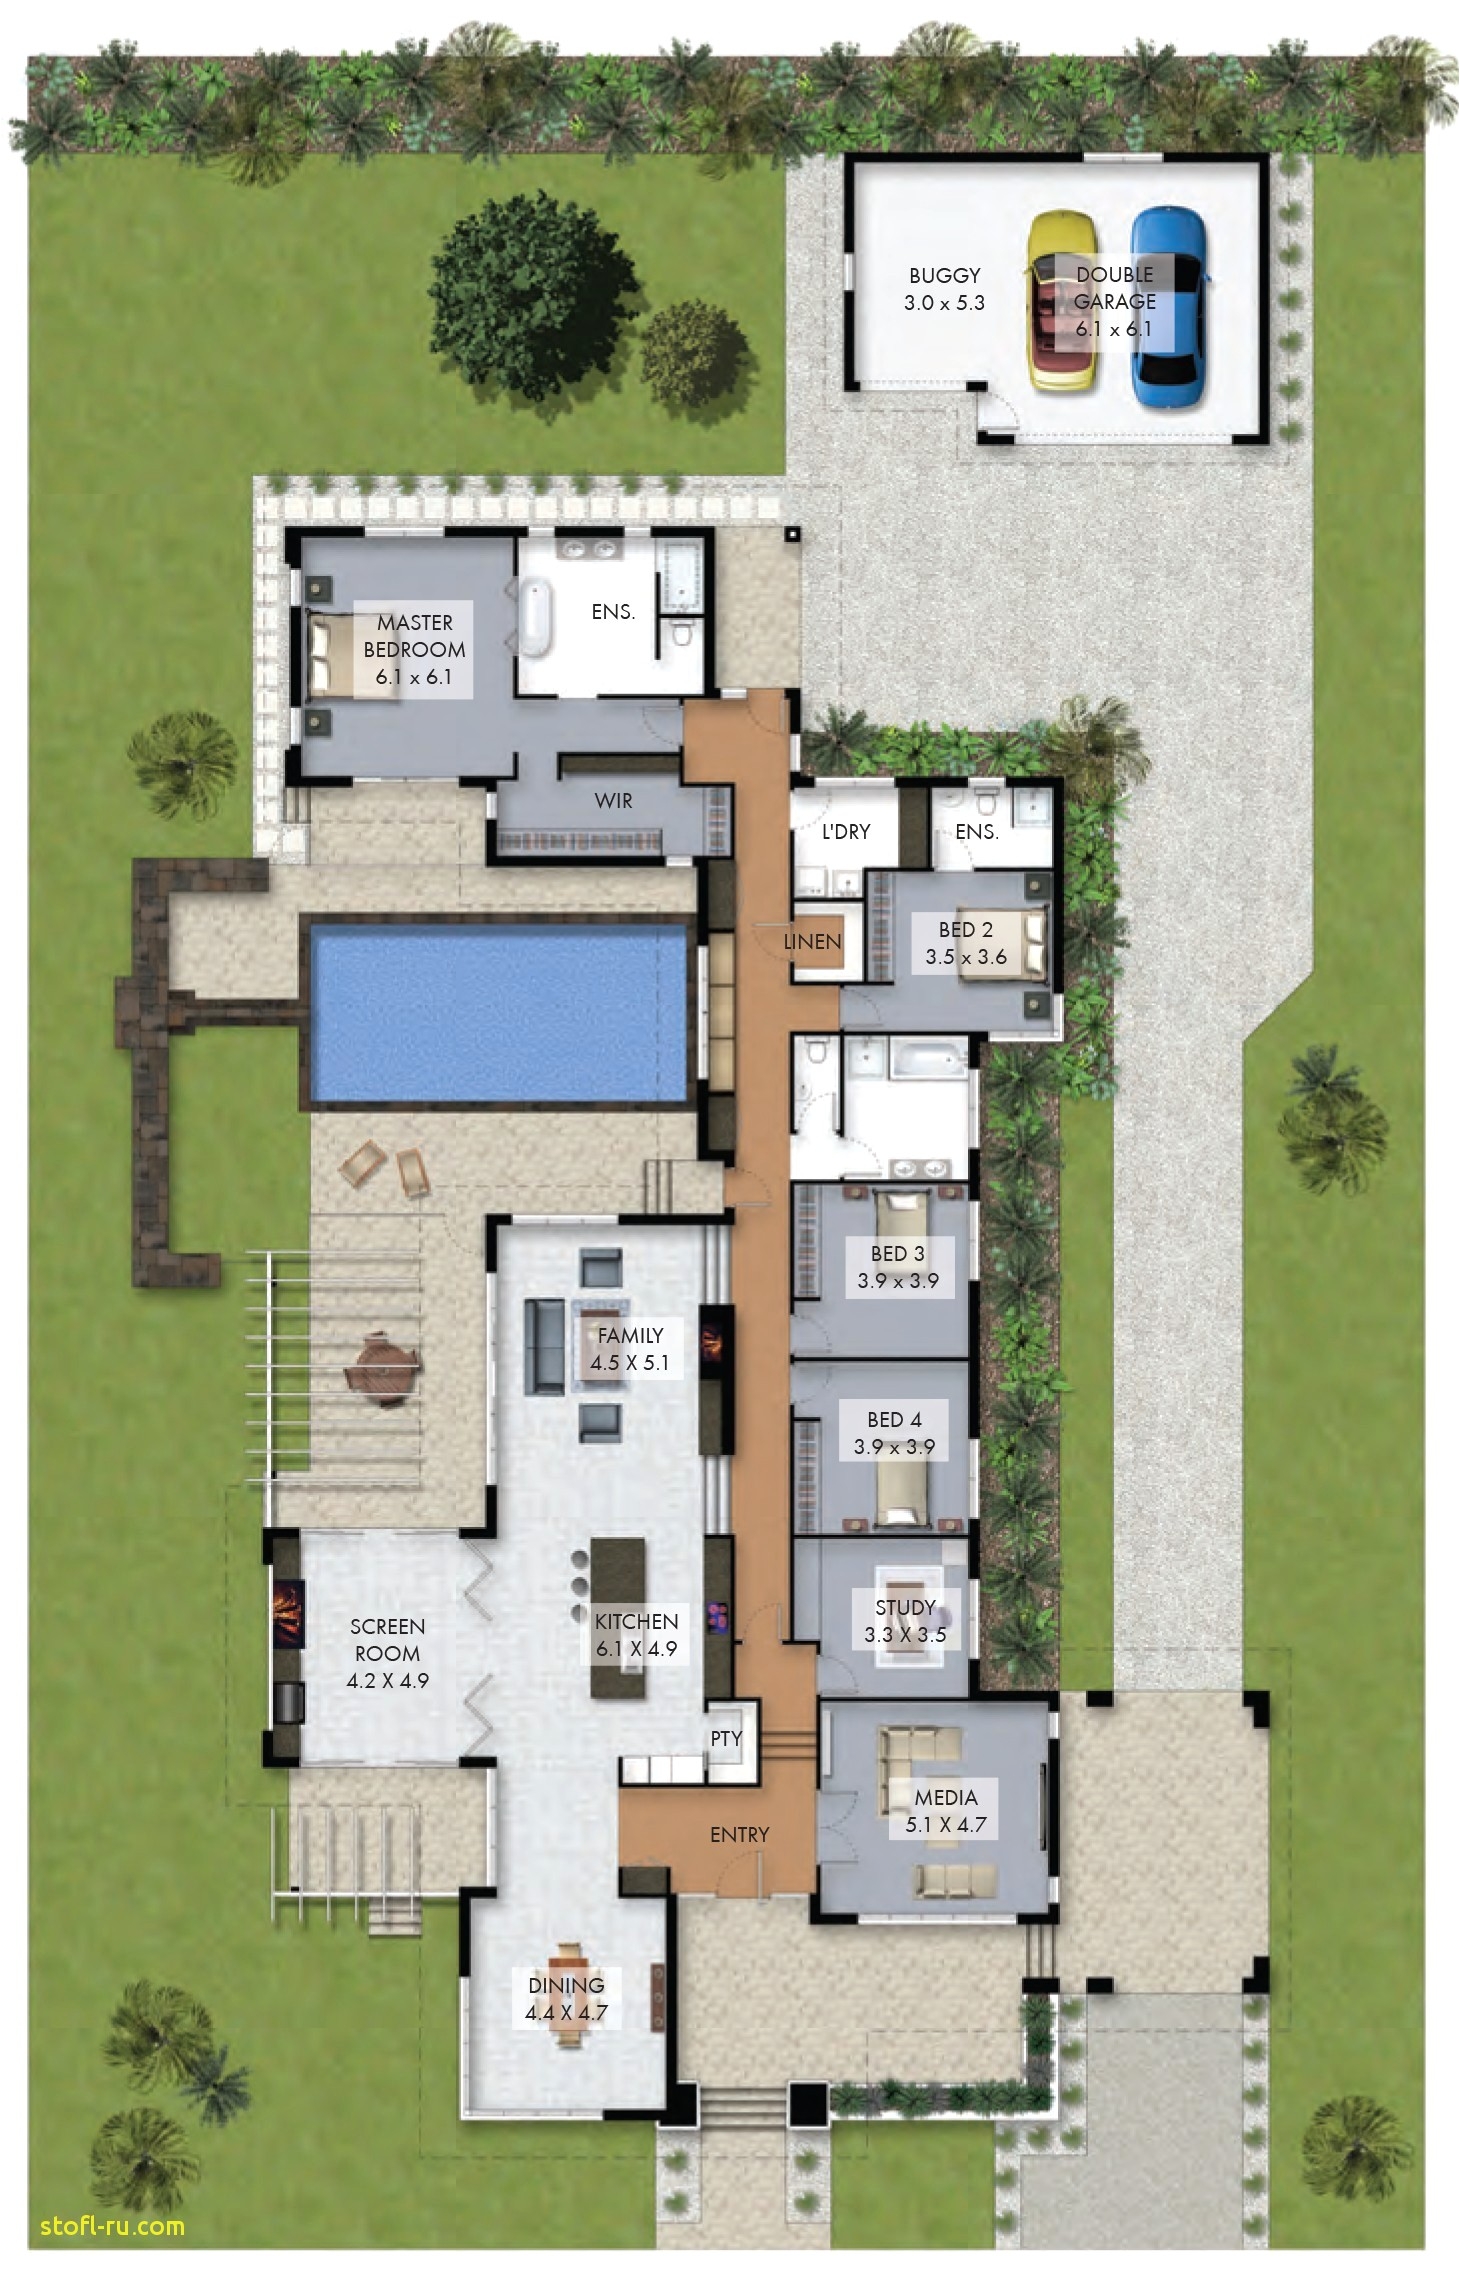 gallery of house plans under 200k amazing house plans barn home floor plans beautiful design plan 0d